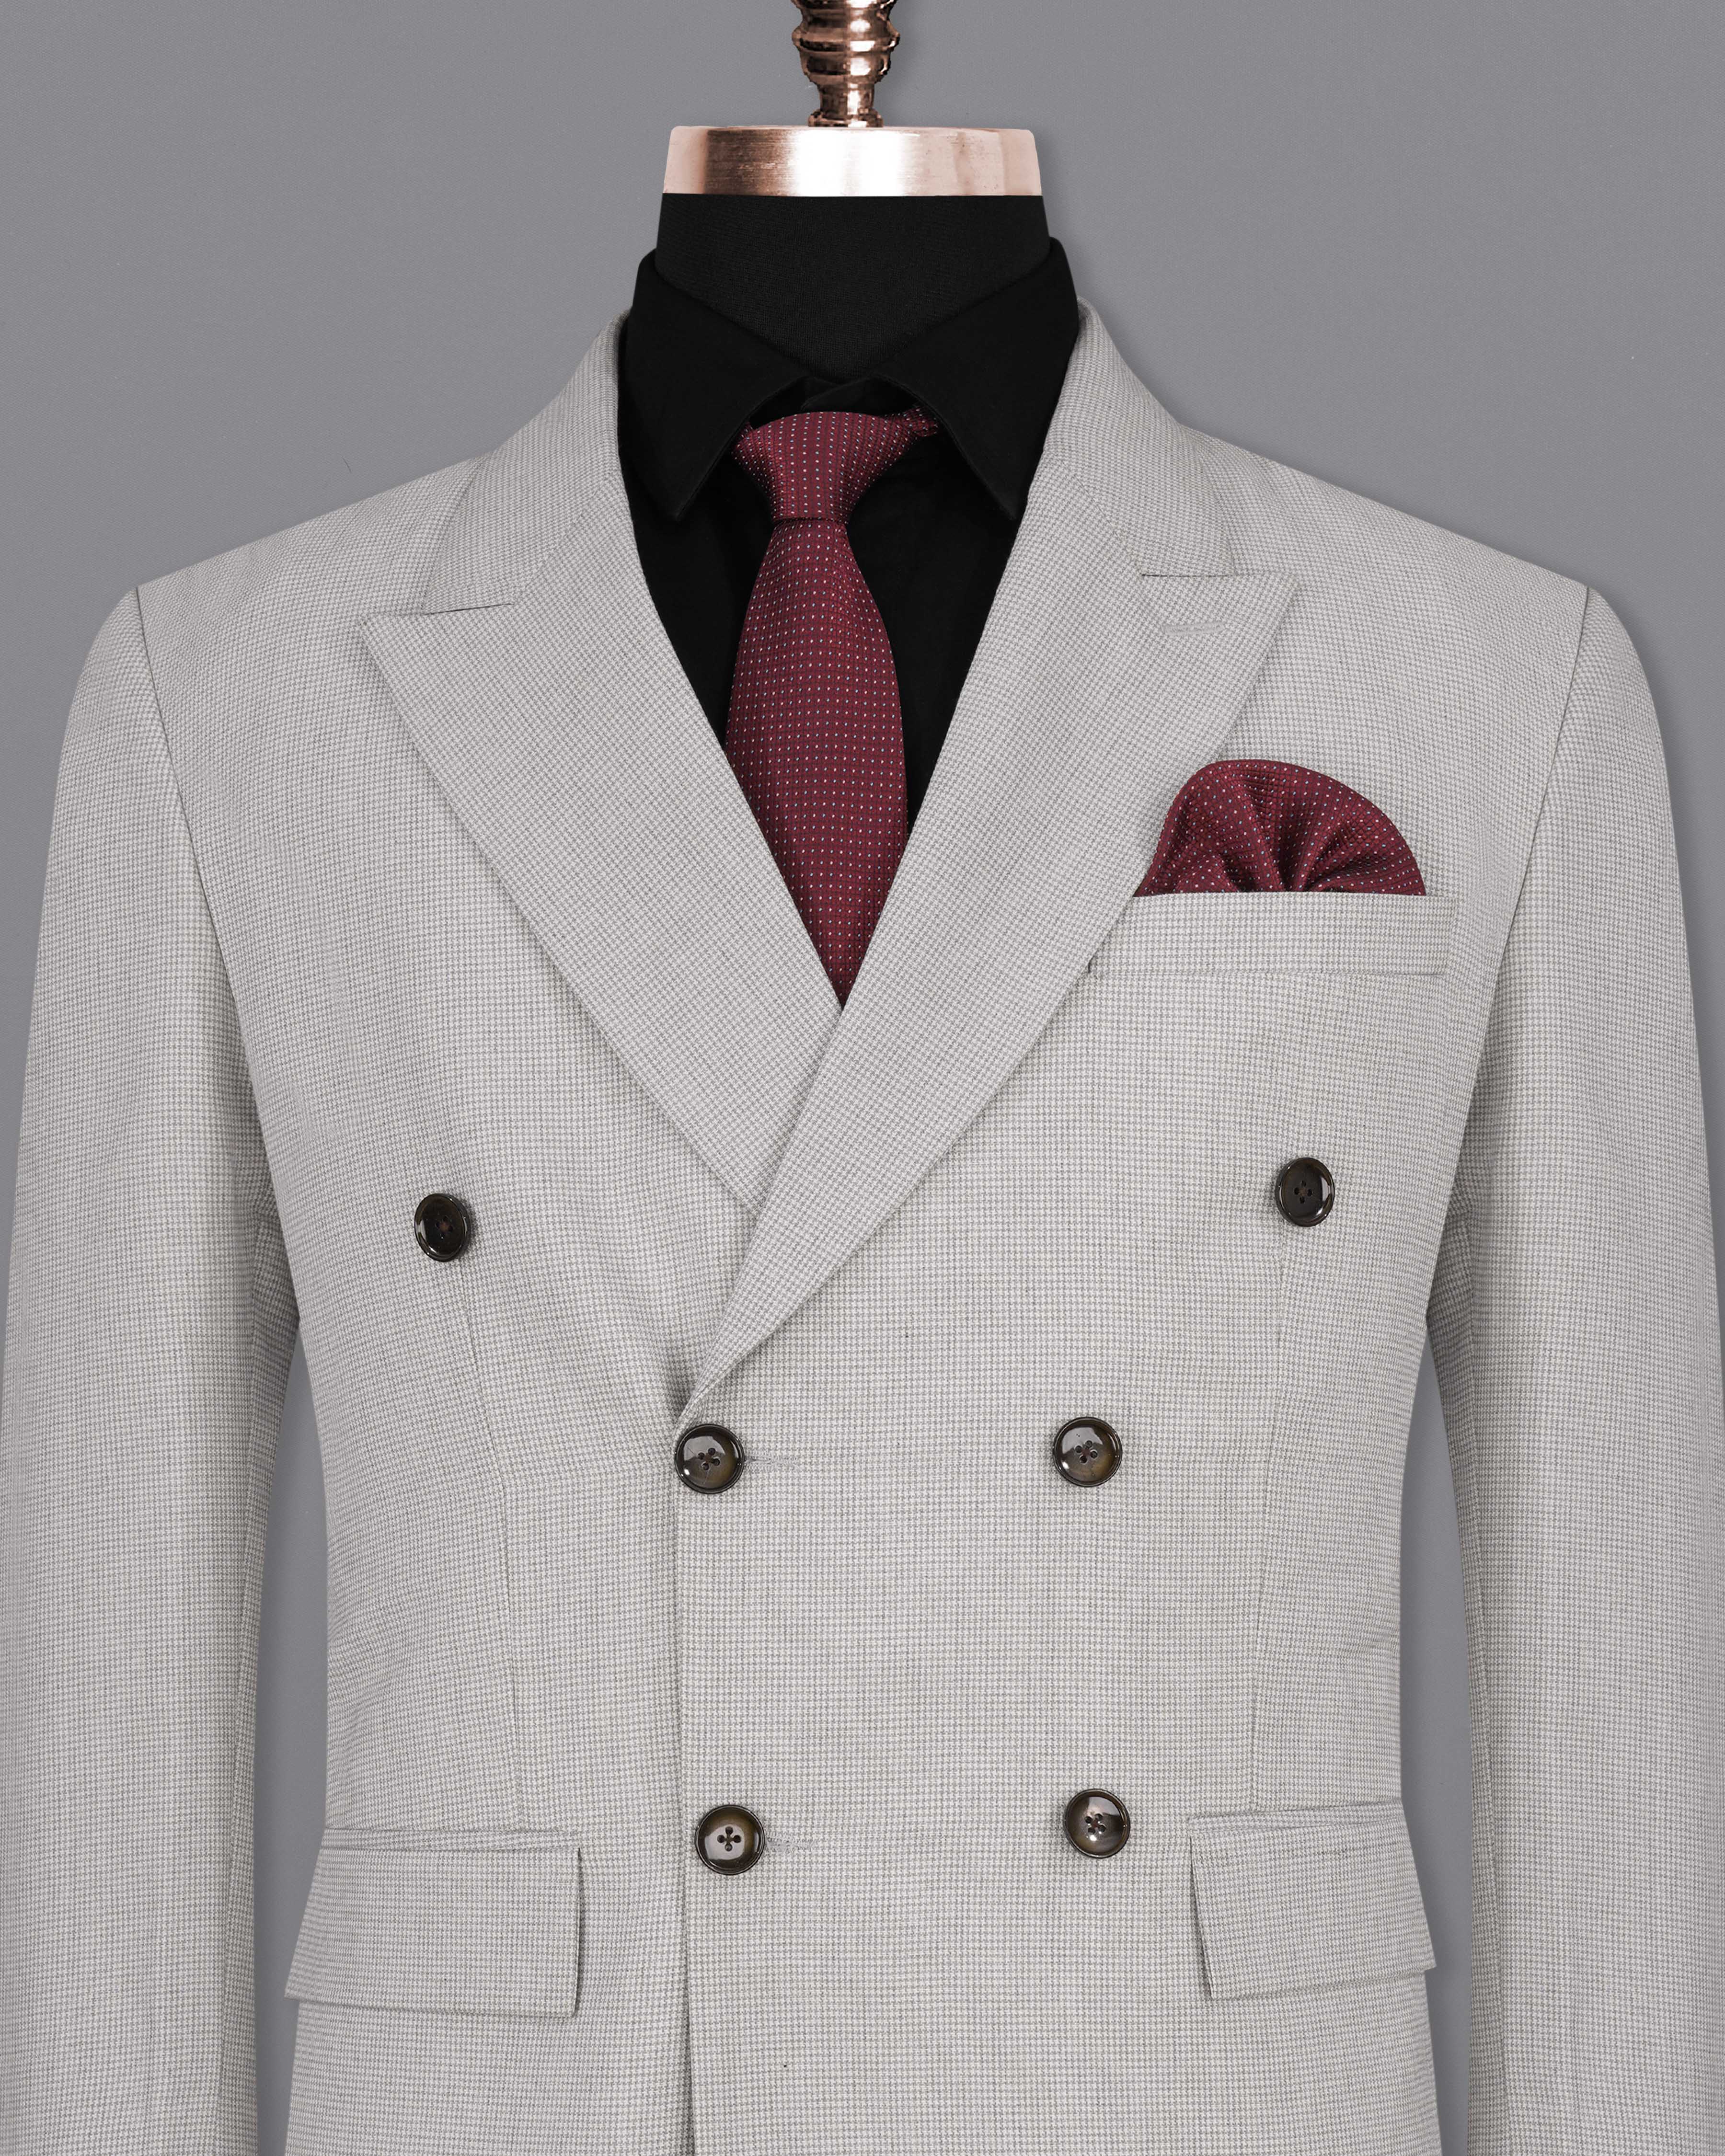 Pale Slate Gray Double Breasted Blazer BL2055-DB-36, BL2055-DB-38, BL2055-DB-40, BL2055-DB-42, BL2055-DB-44, BL2055-DB-46, BL2055-DB-48, BL2055-DB-50, BL2055-DB-52, BL2055-DB-54, BL2055-DB-56, BL2055-DB-58, BL2055-DB-60